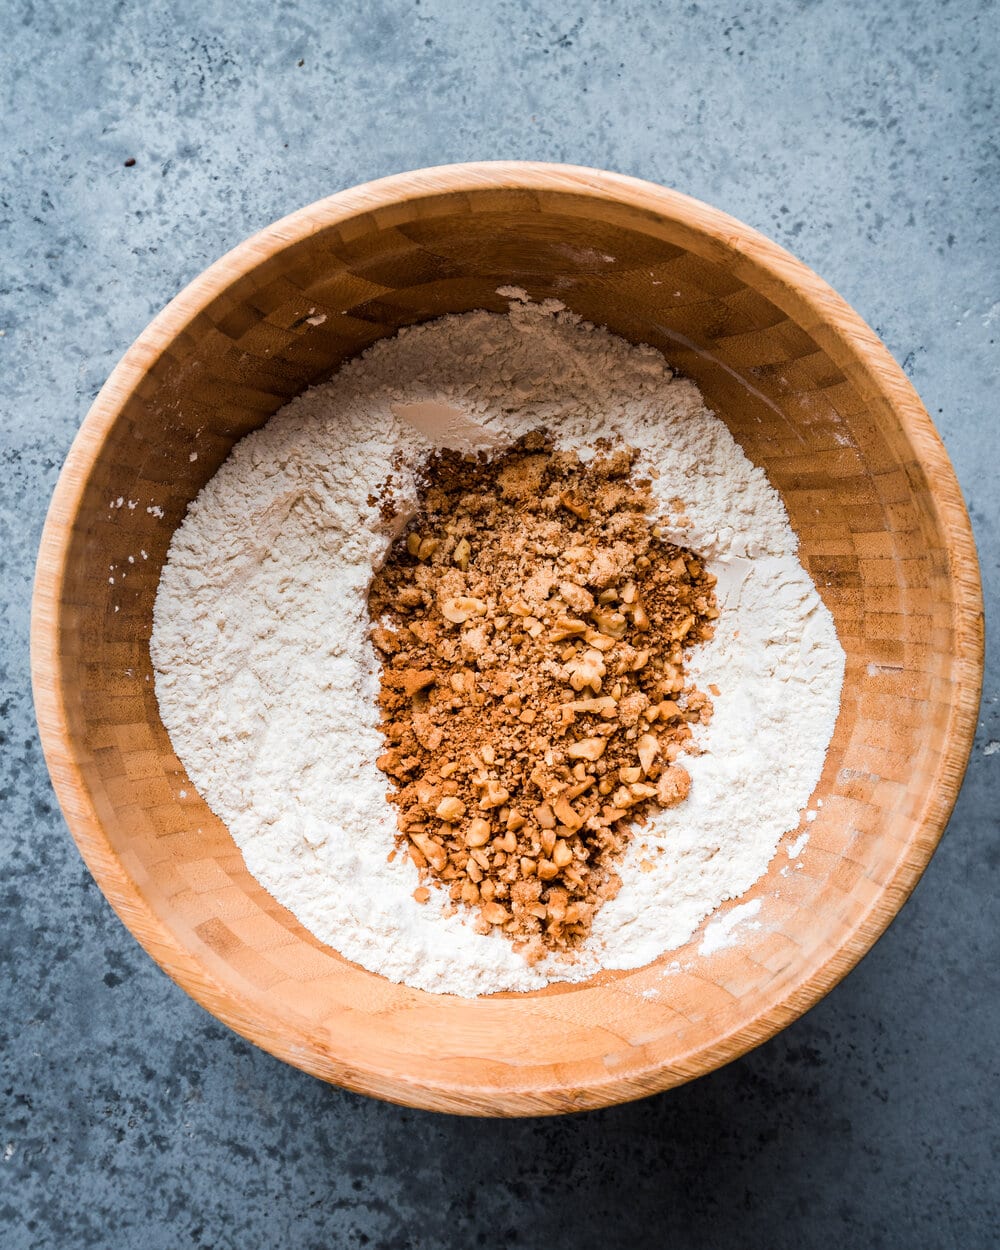 brown sugar and walnuts added to flour, baking powder, baking soda, and salt in bowl